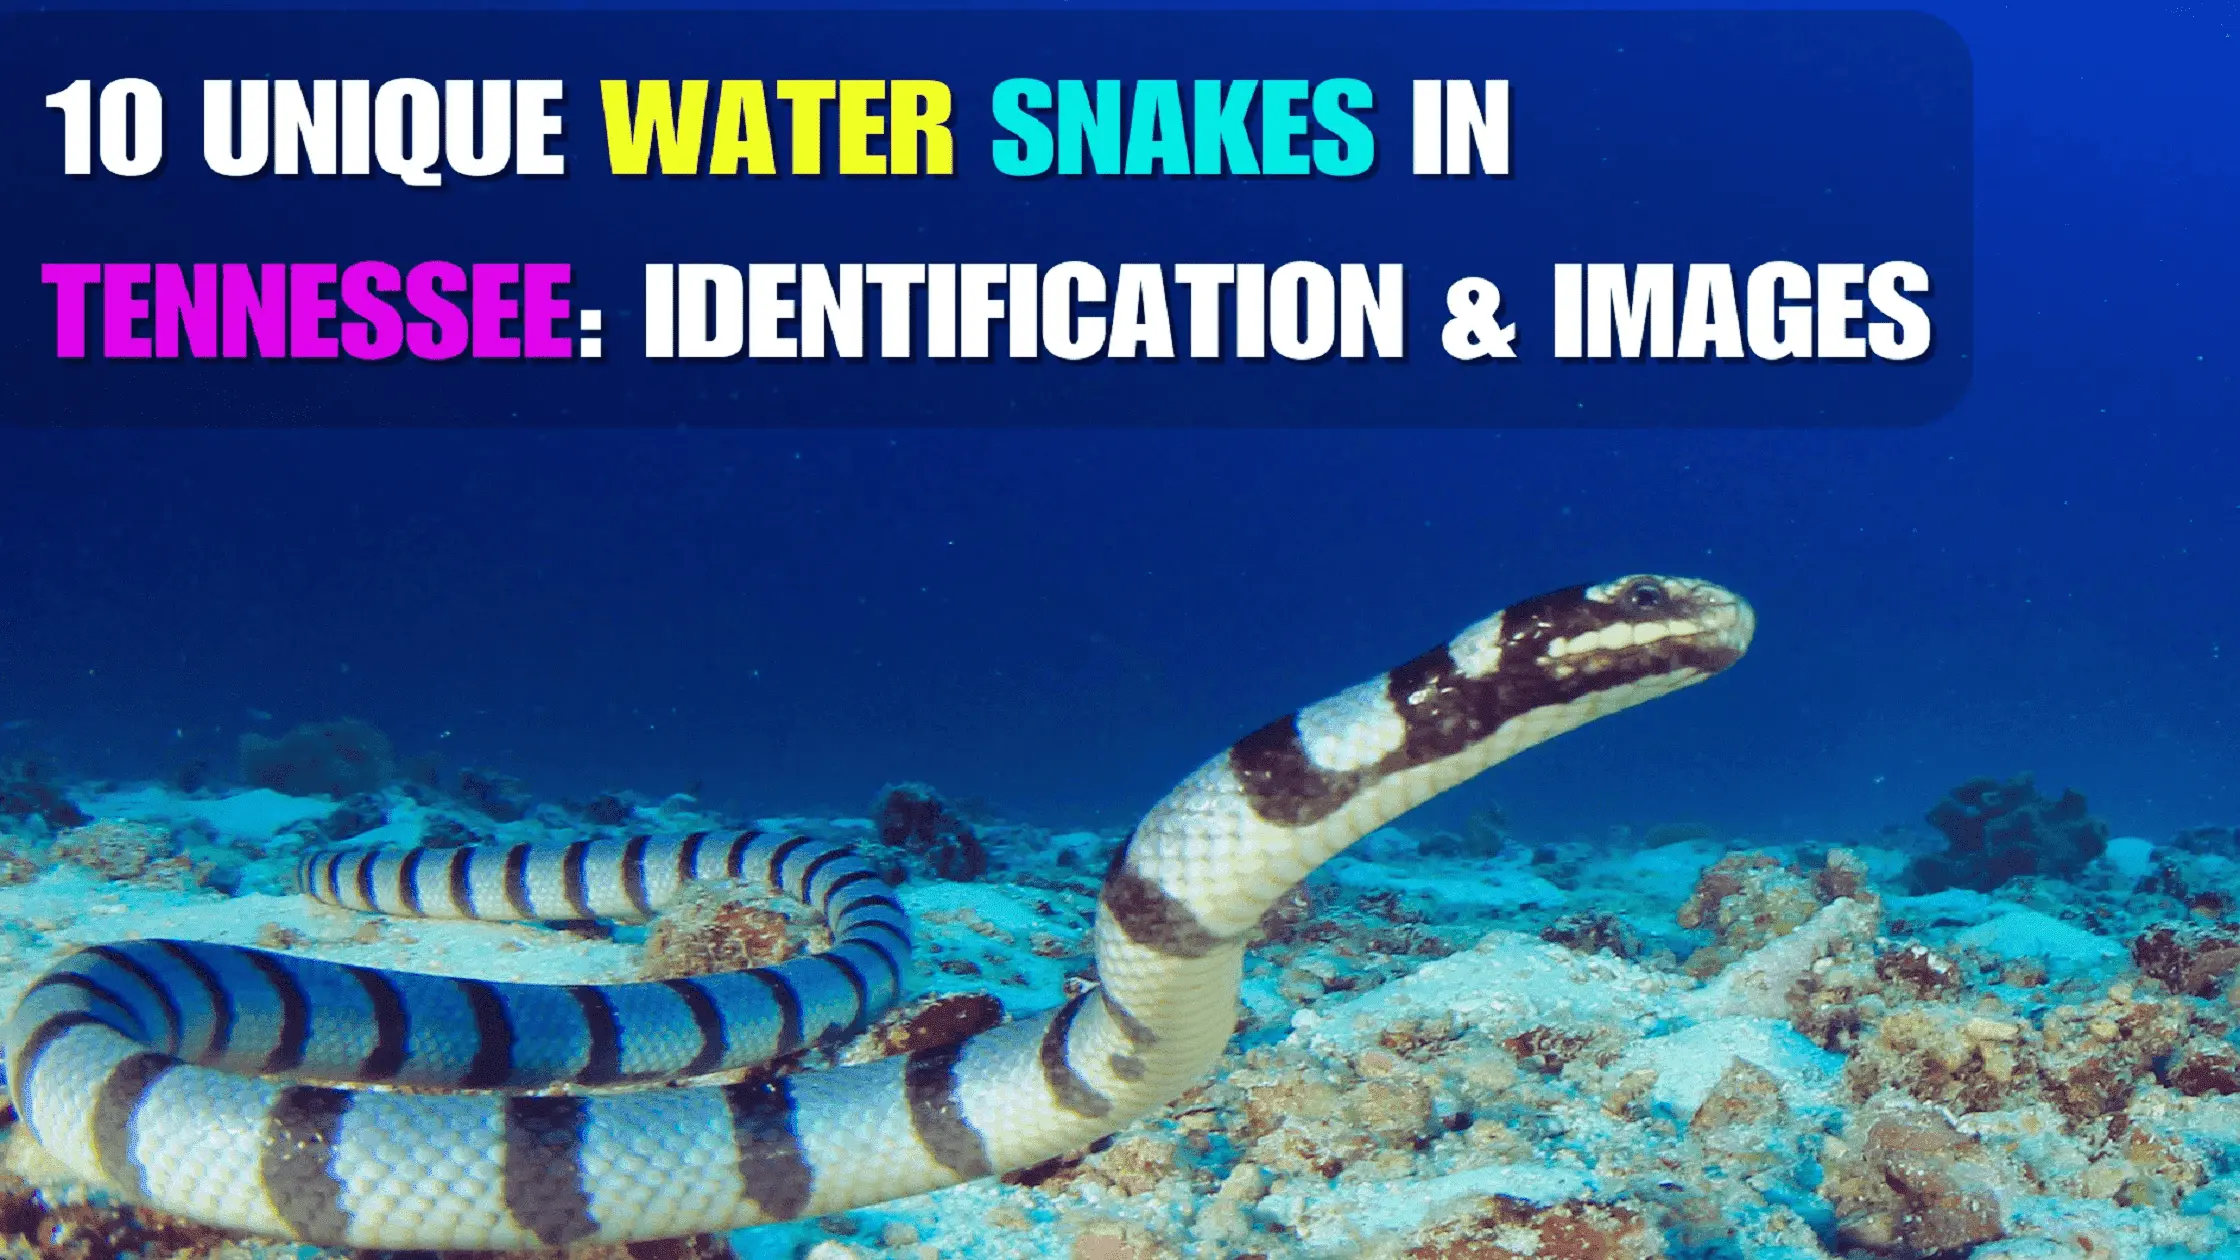 10 Unique Water Snakes in Tennessee: Identification & Images